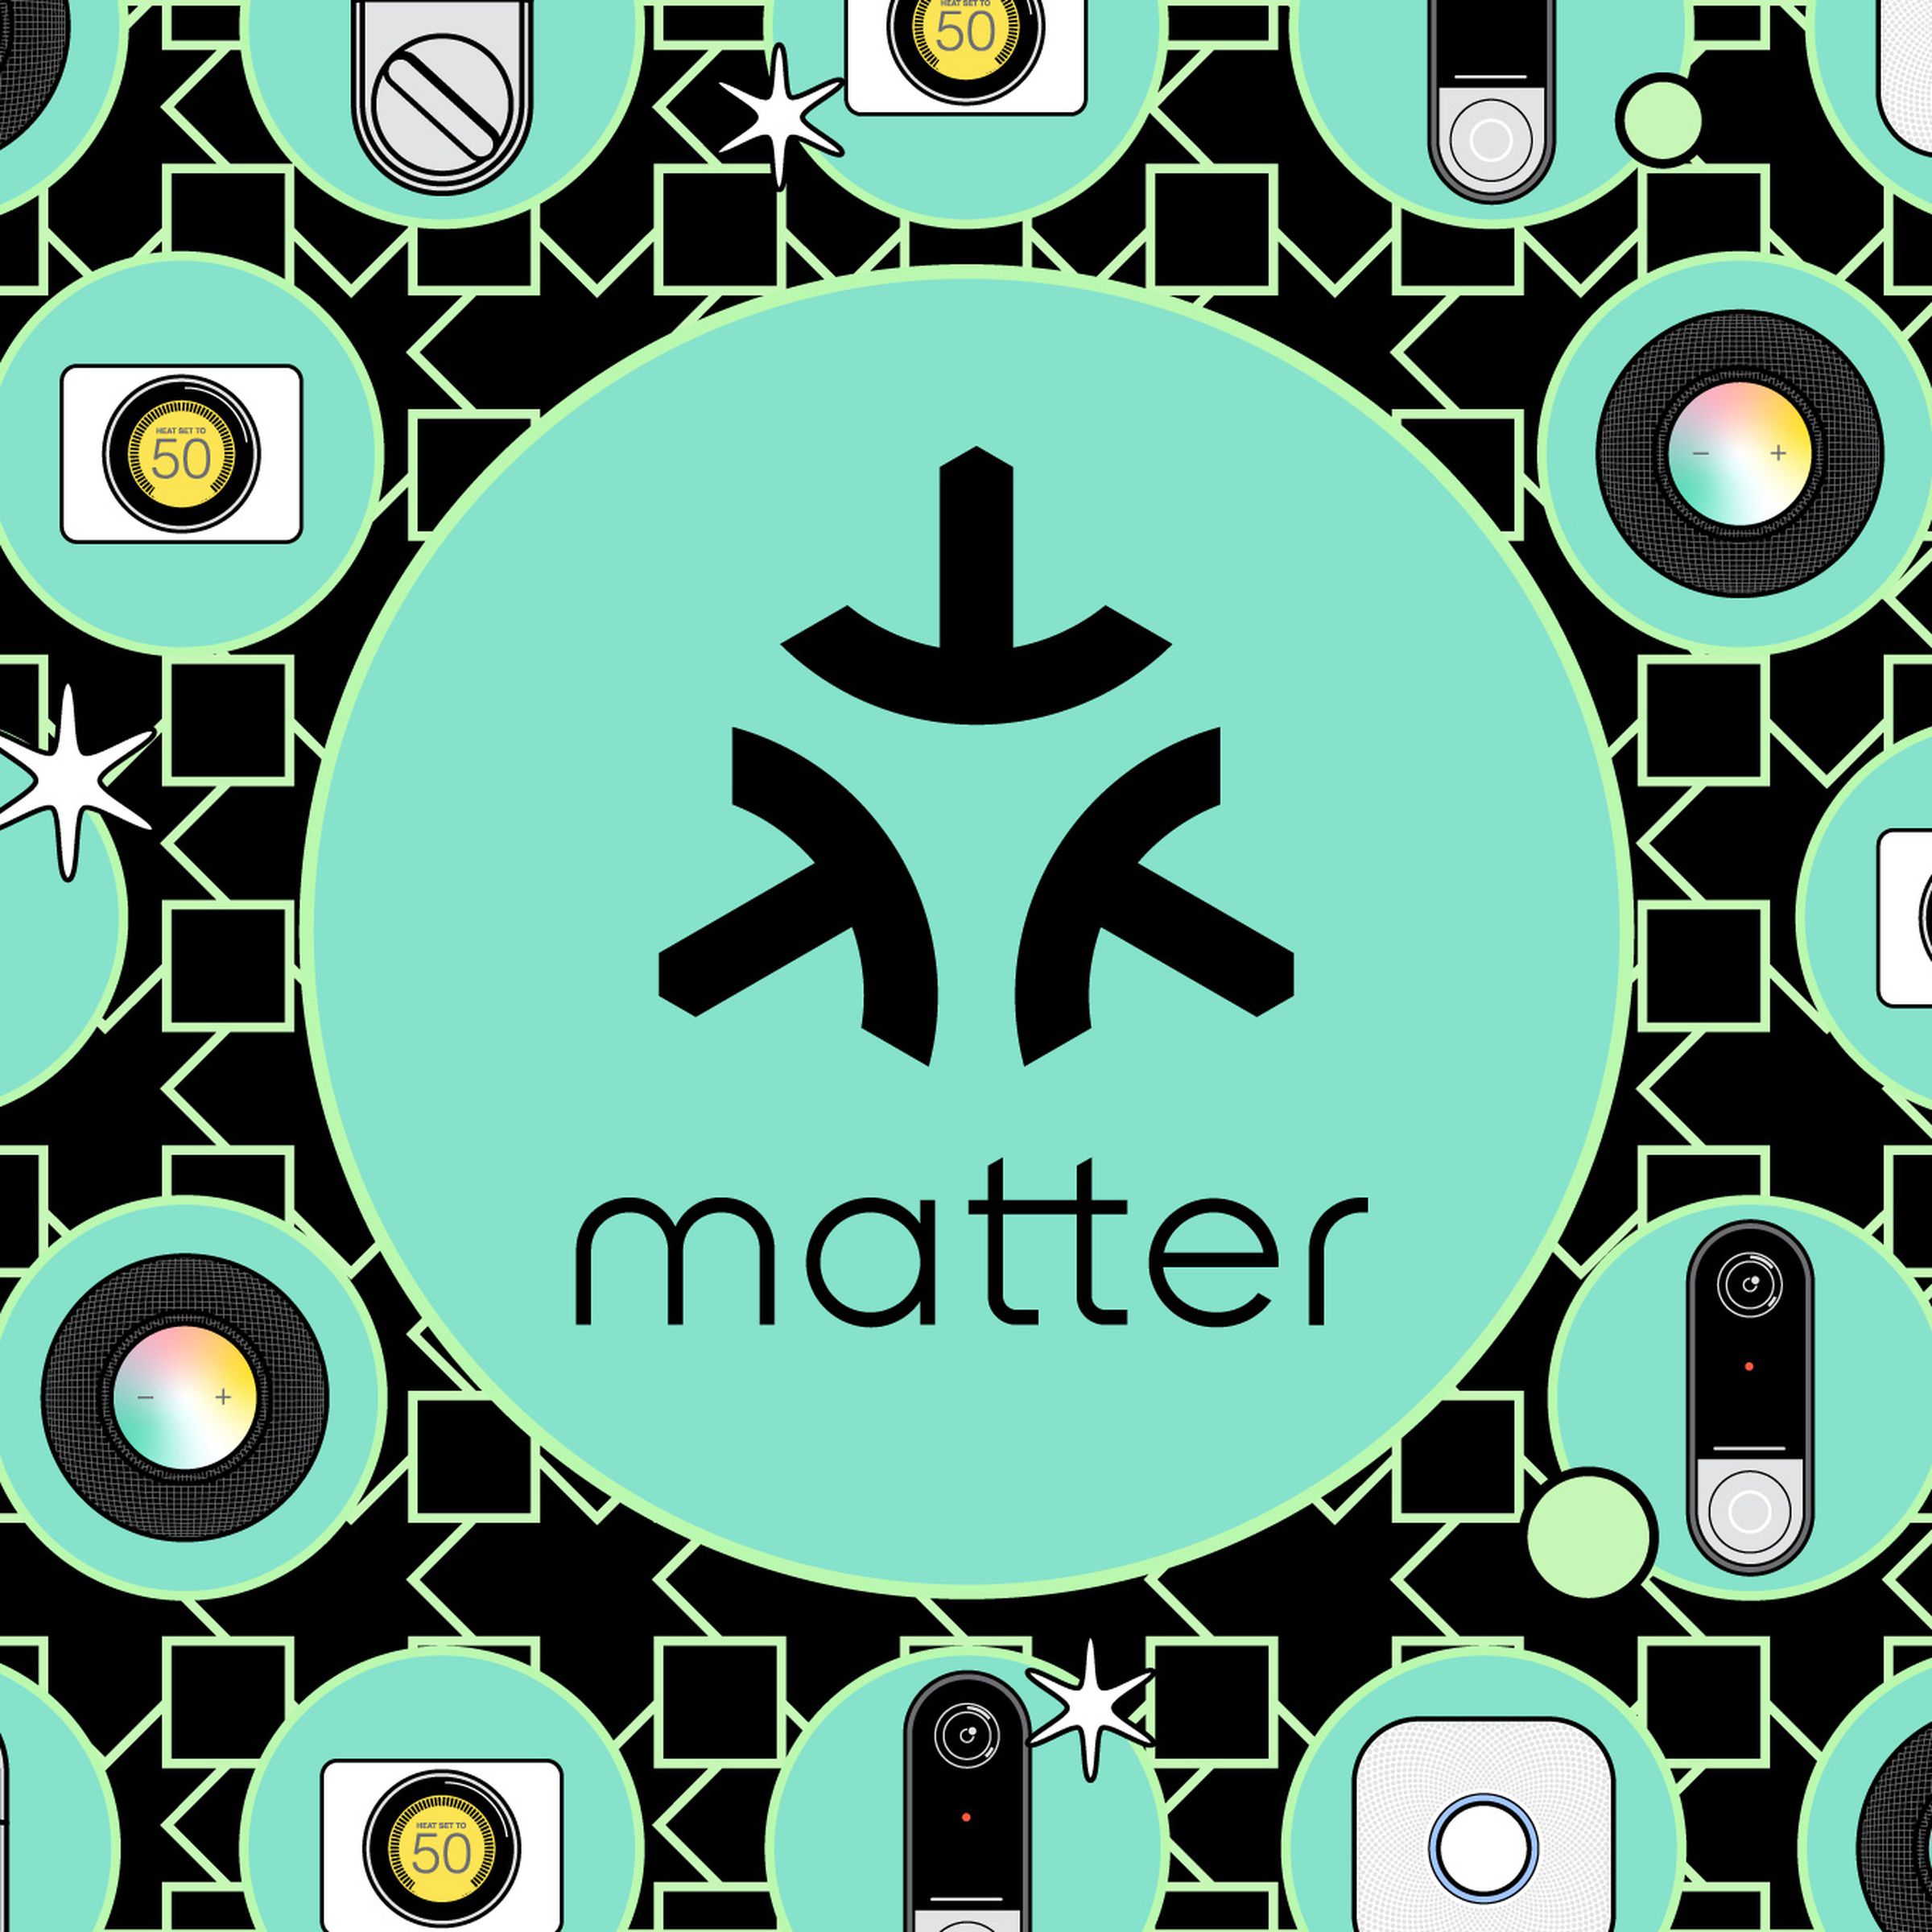 Vector illustration of a Matter logo on a graphic background.